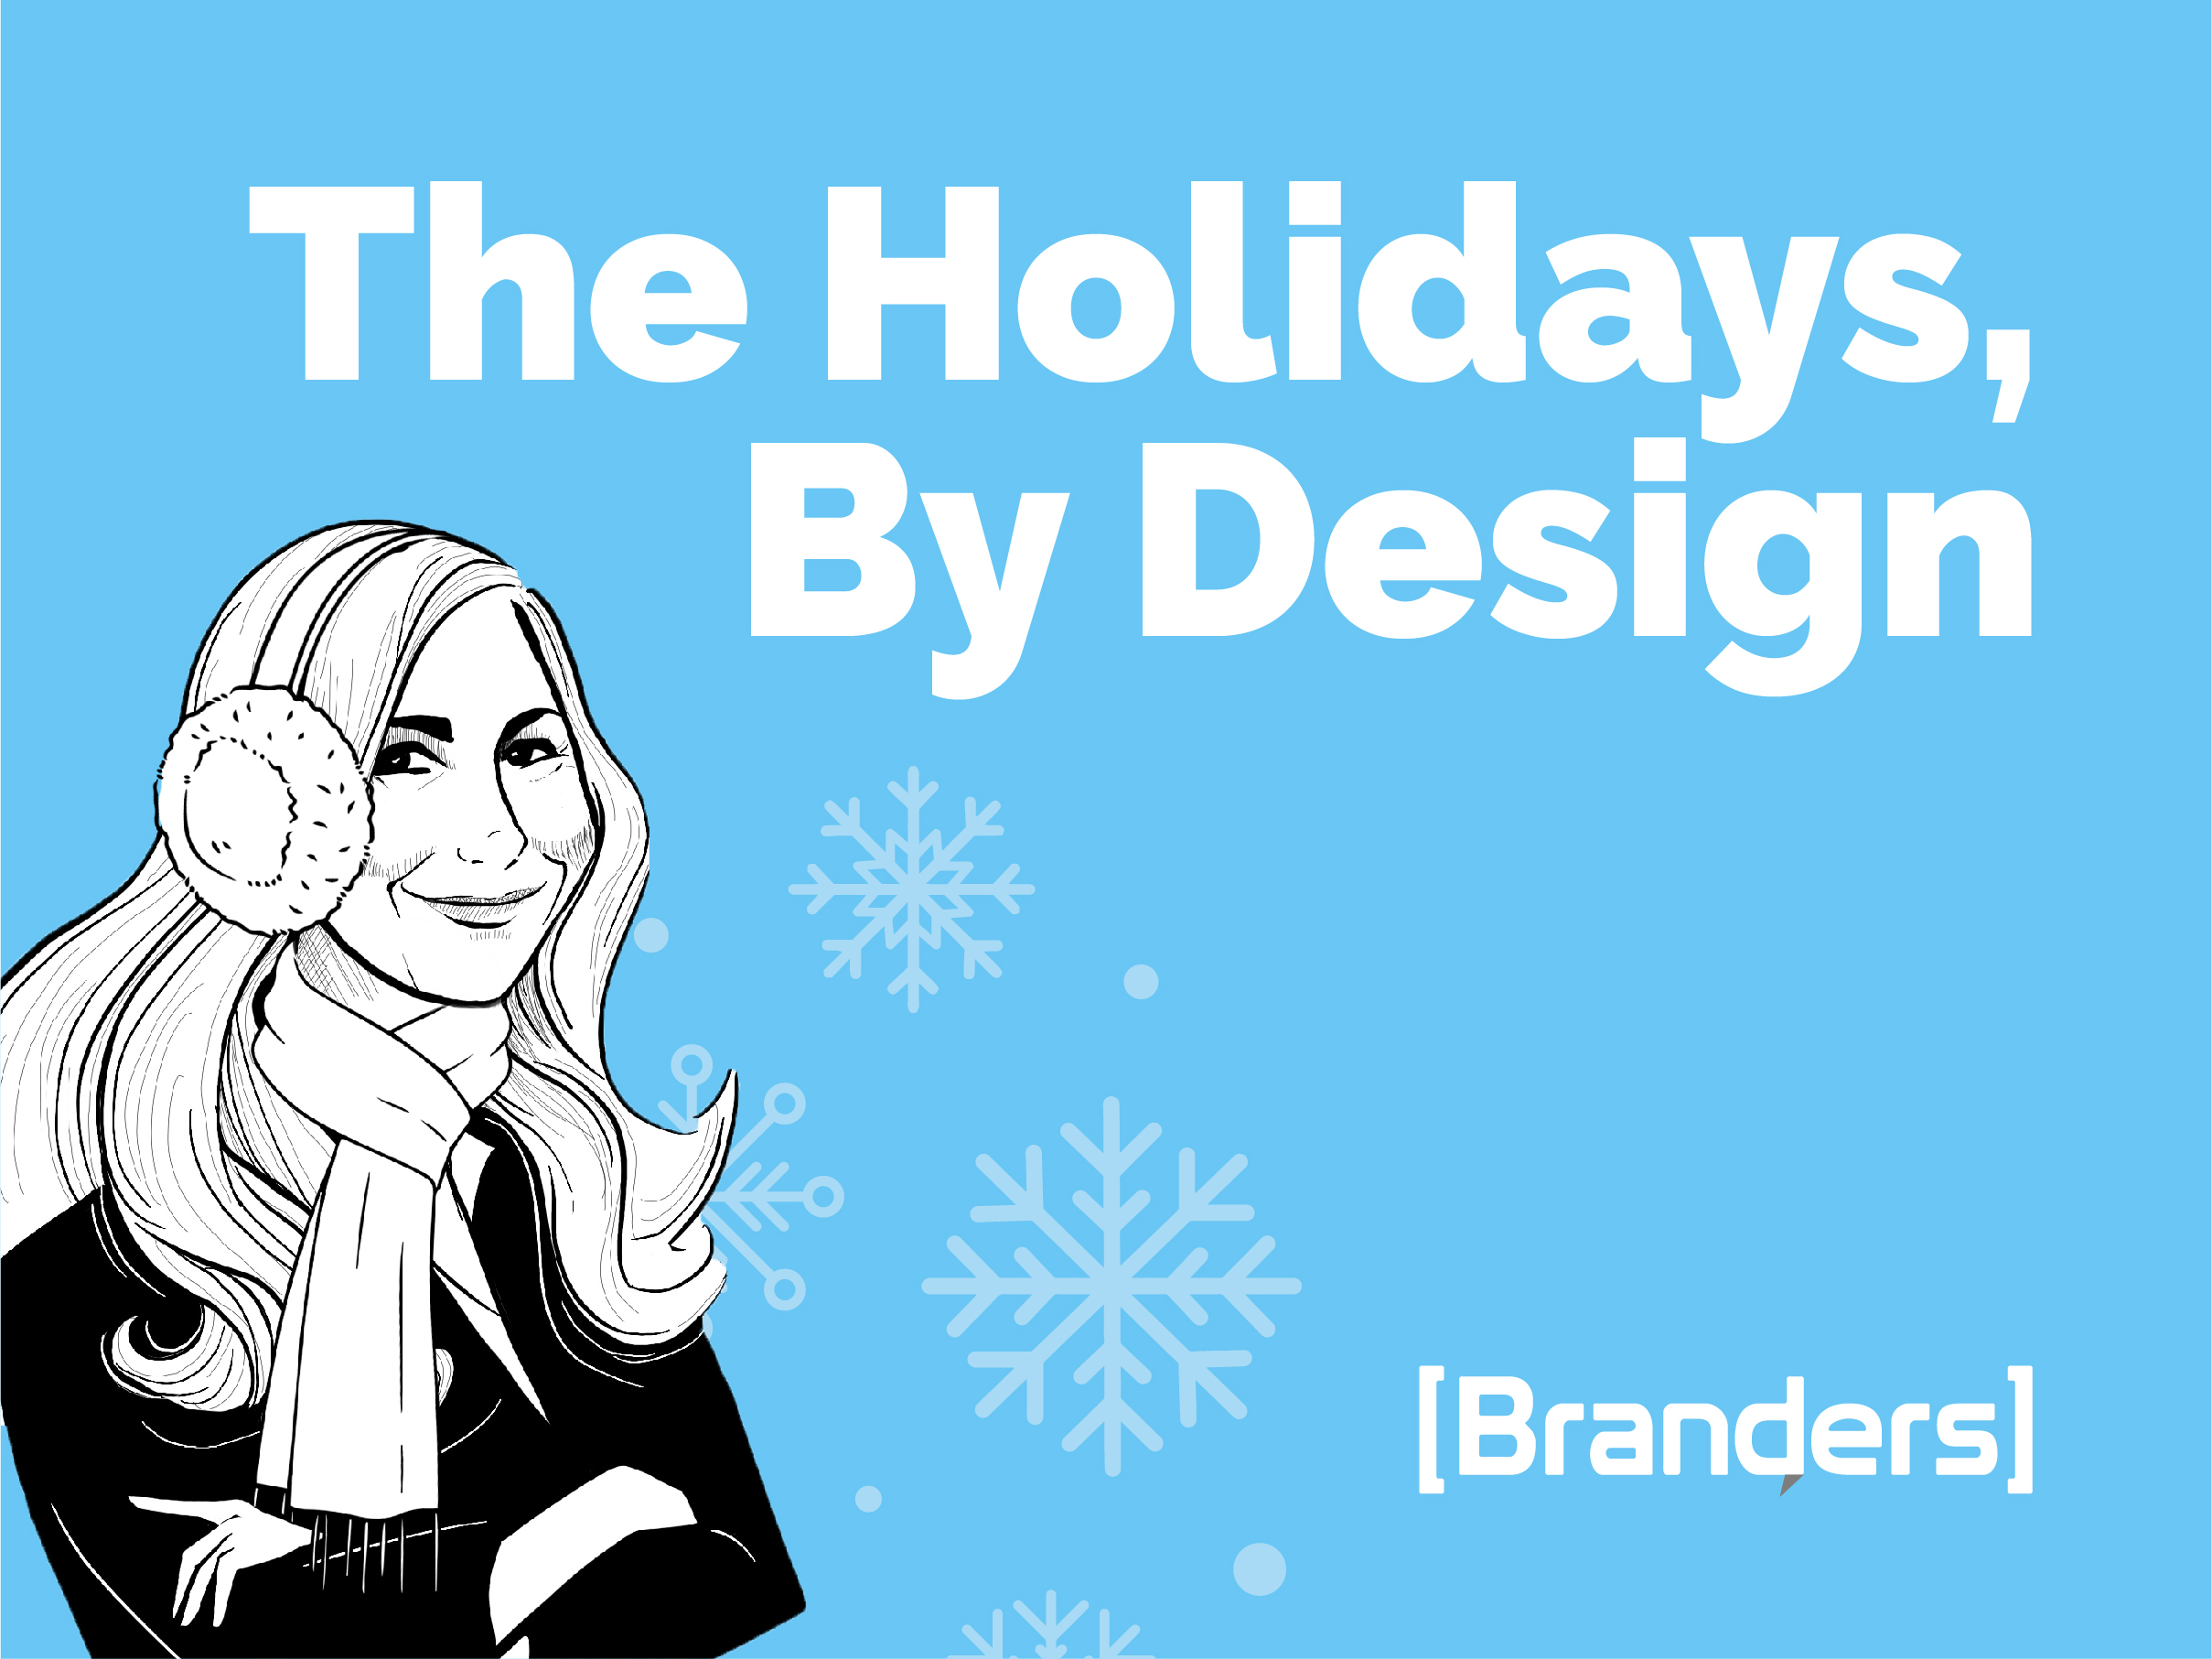 The Holidays, By Design